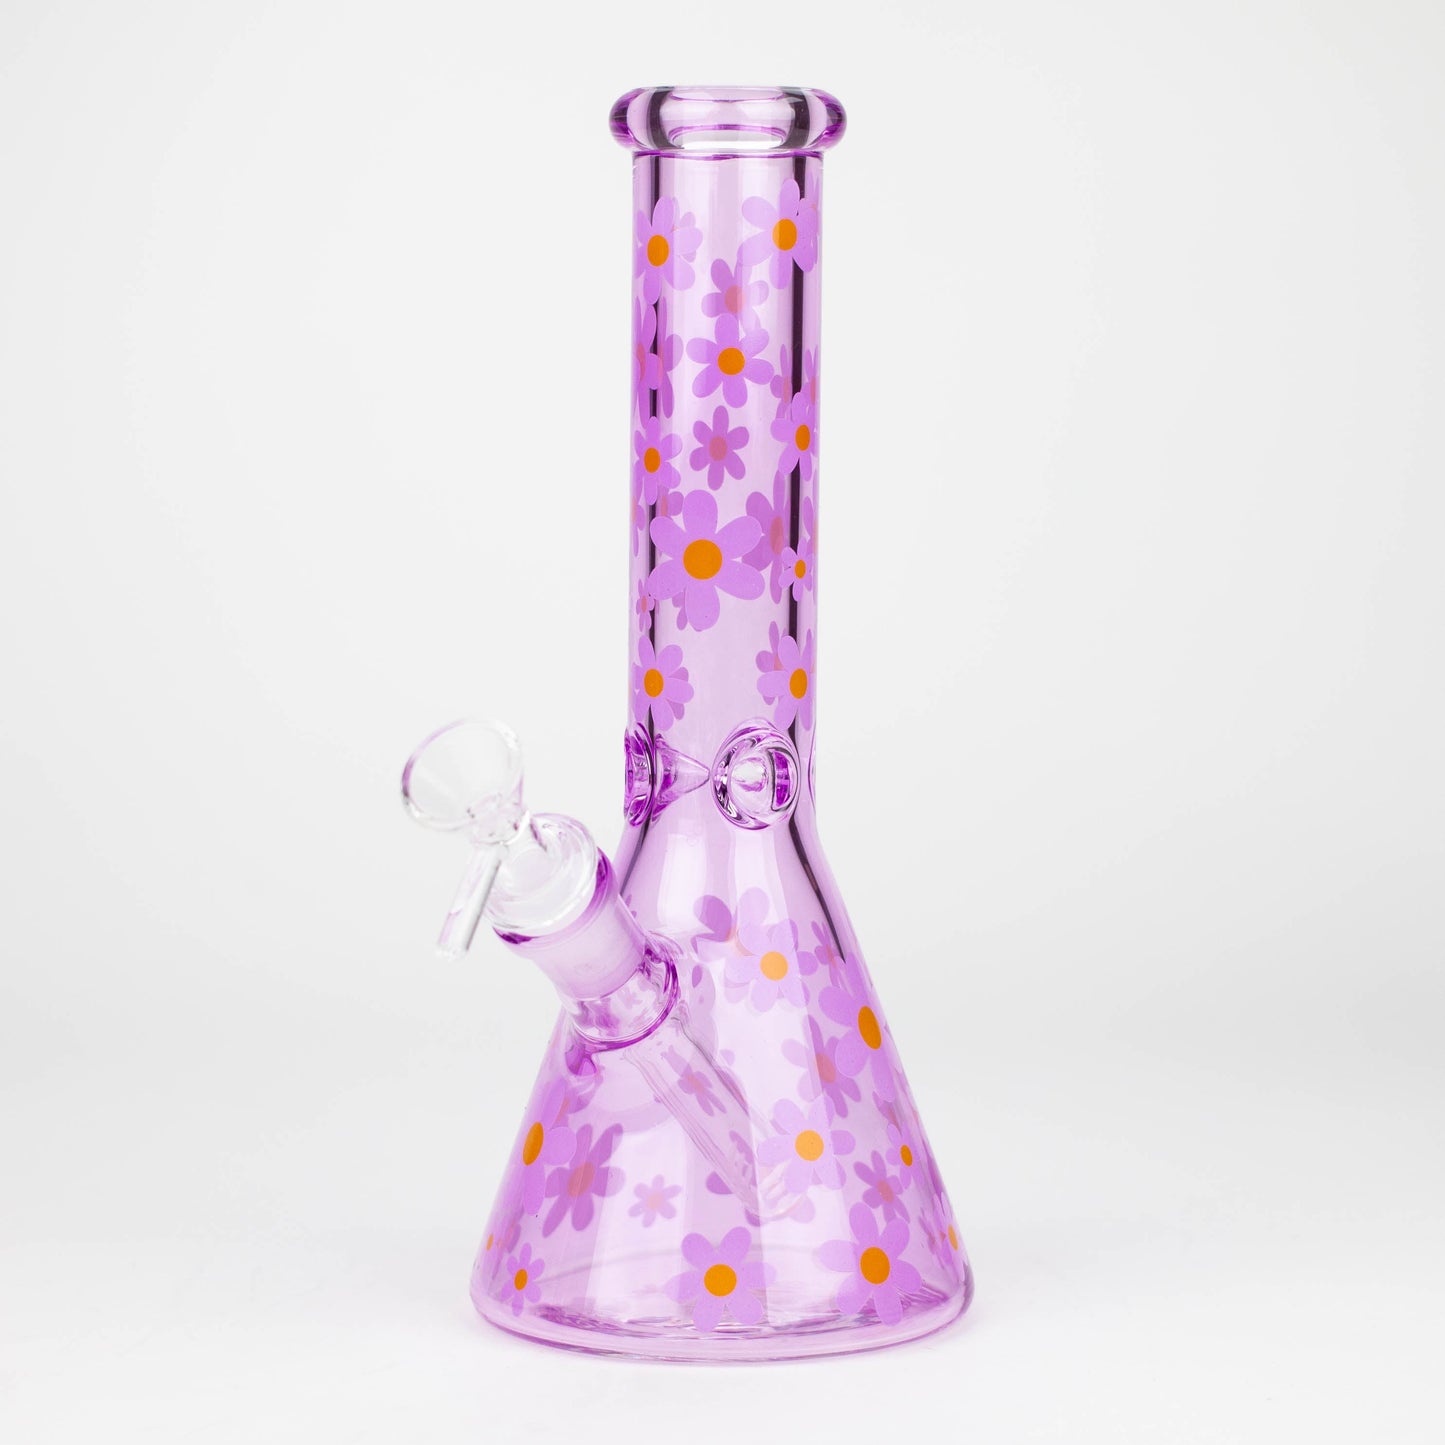 10" Color Glass Bong With Daisy Design [WP 061]_2